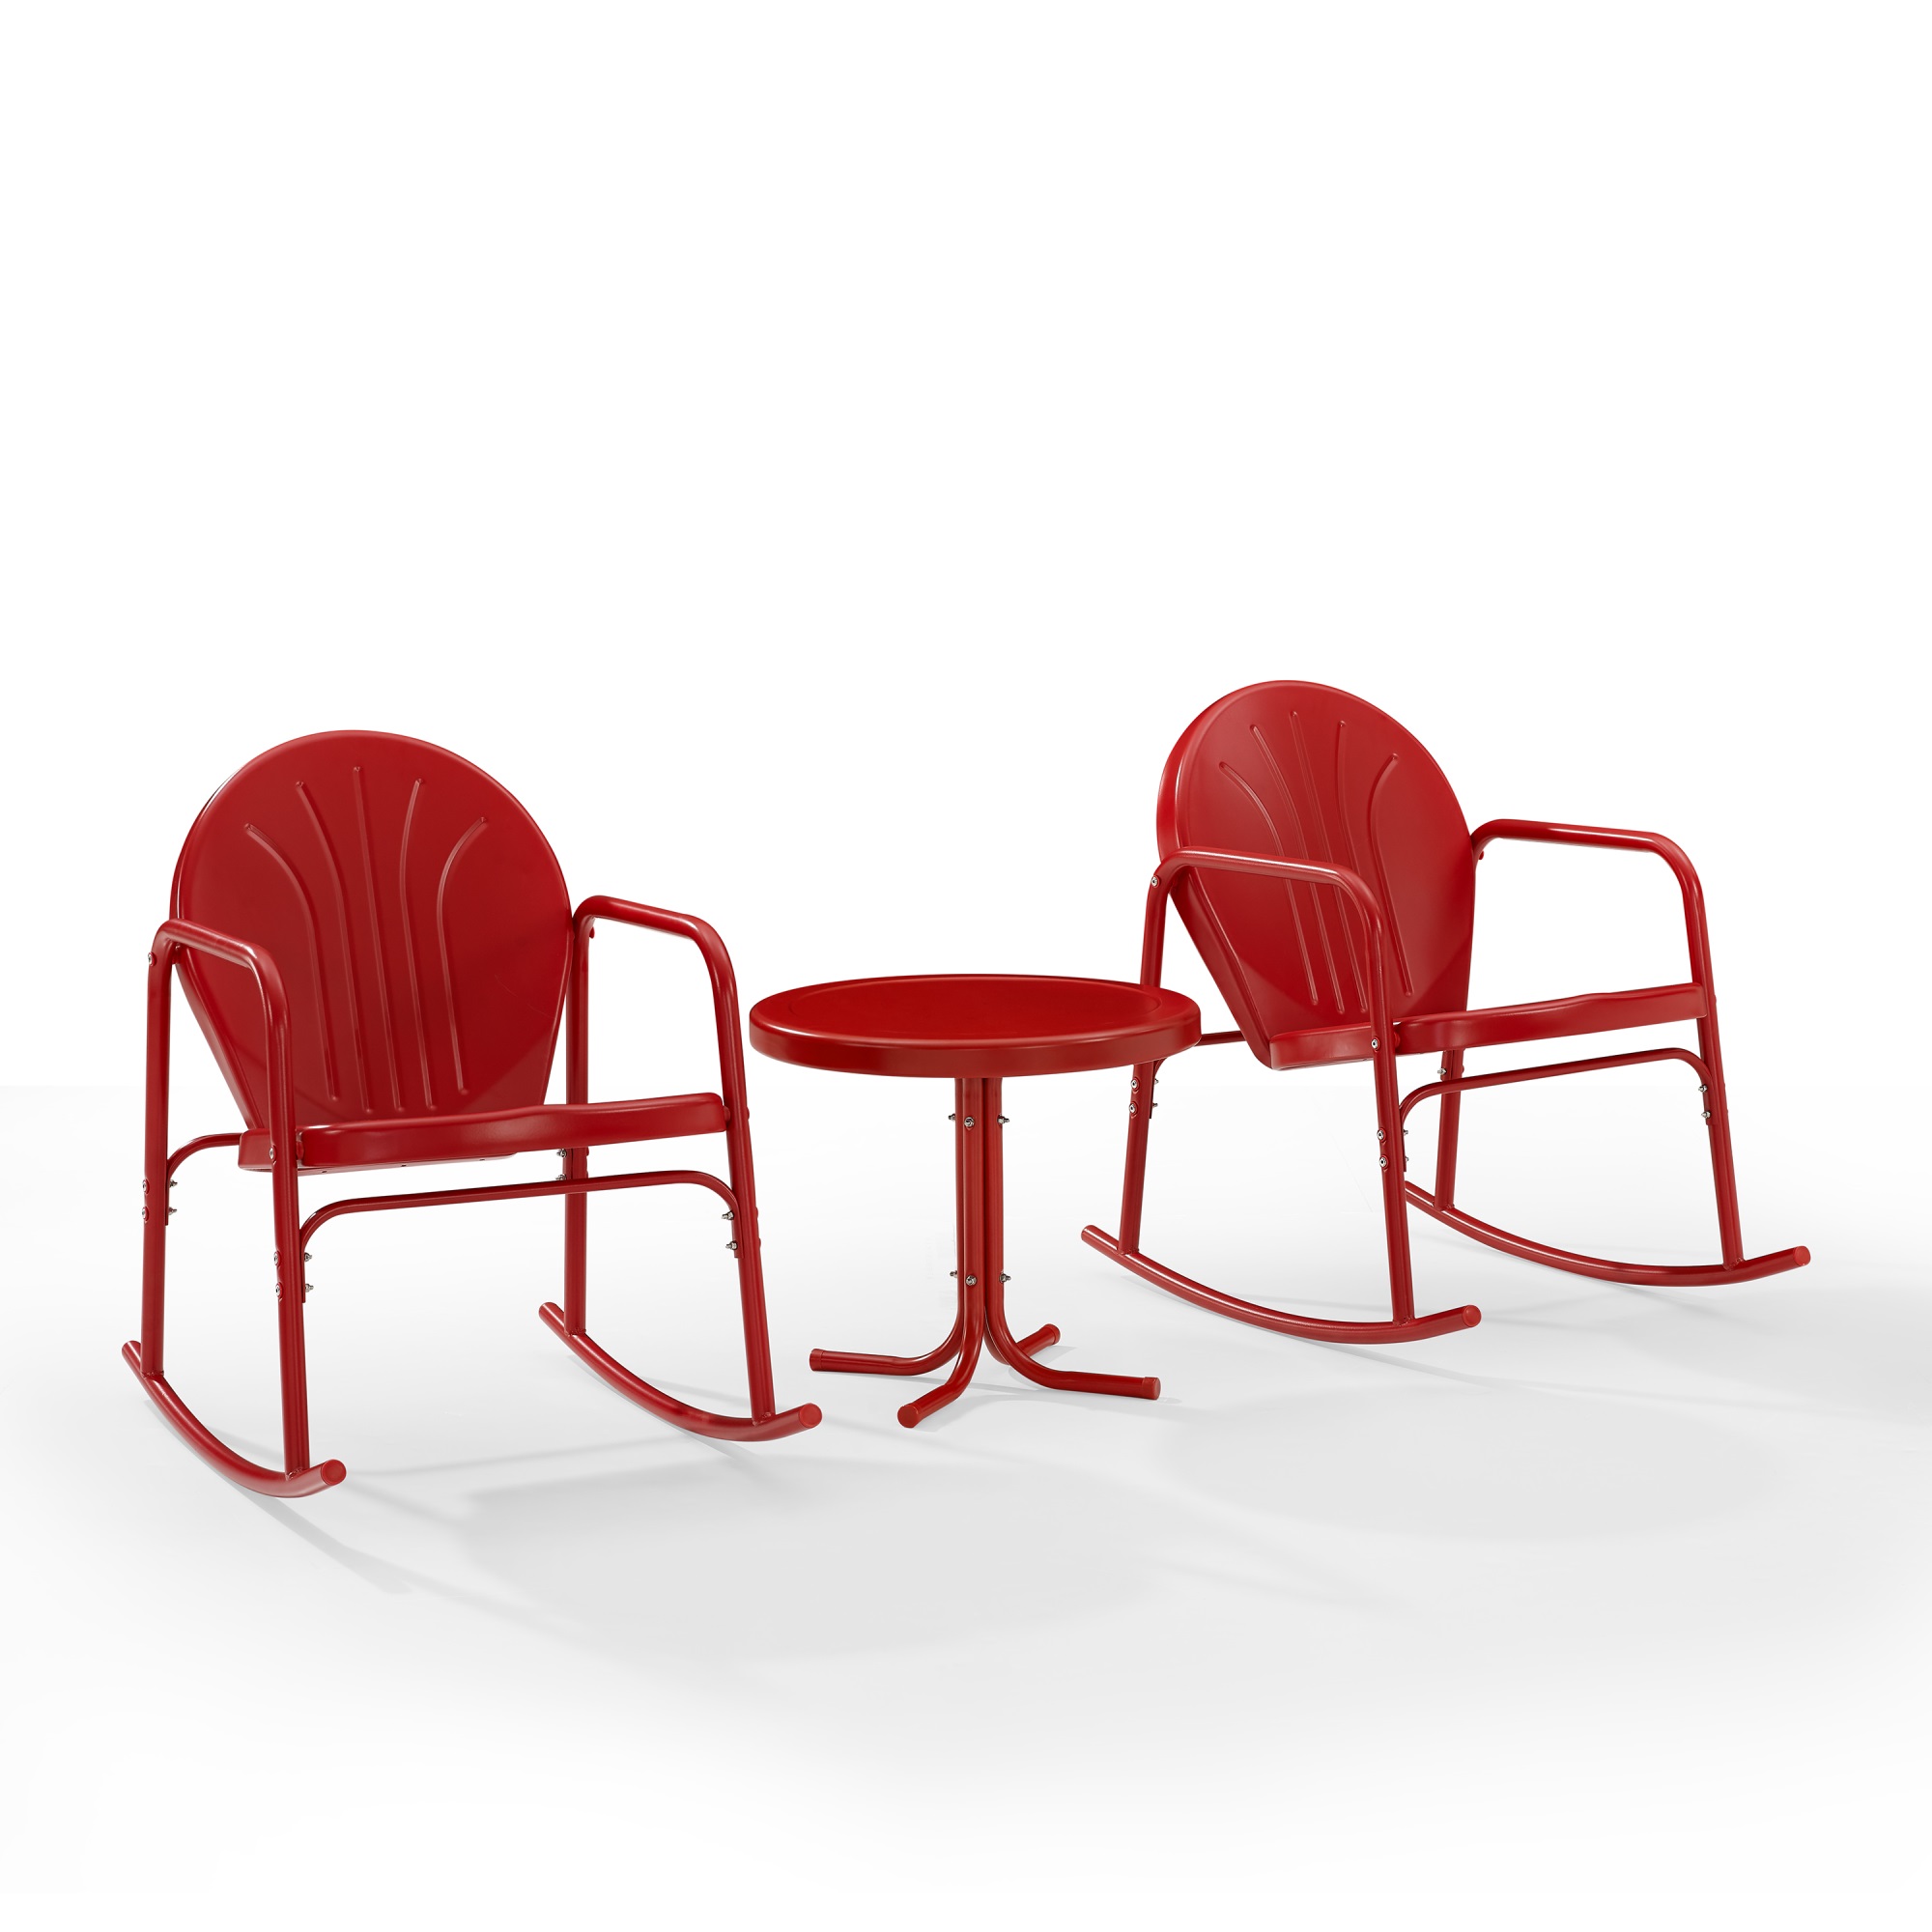 Crosley Griffith 3Pc Outdoor Rocking Chair Set - Bright Red Gloss